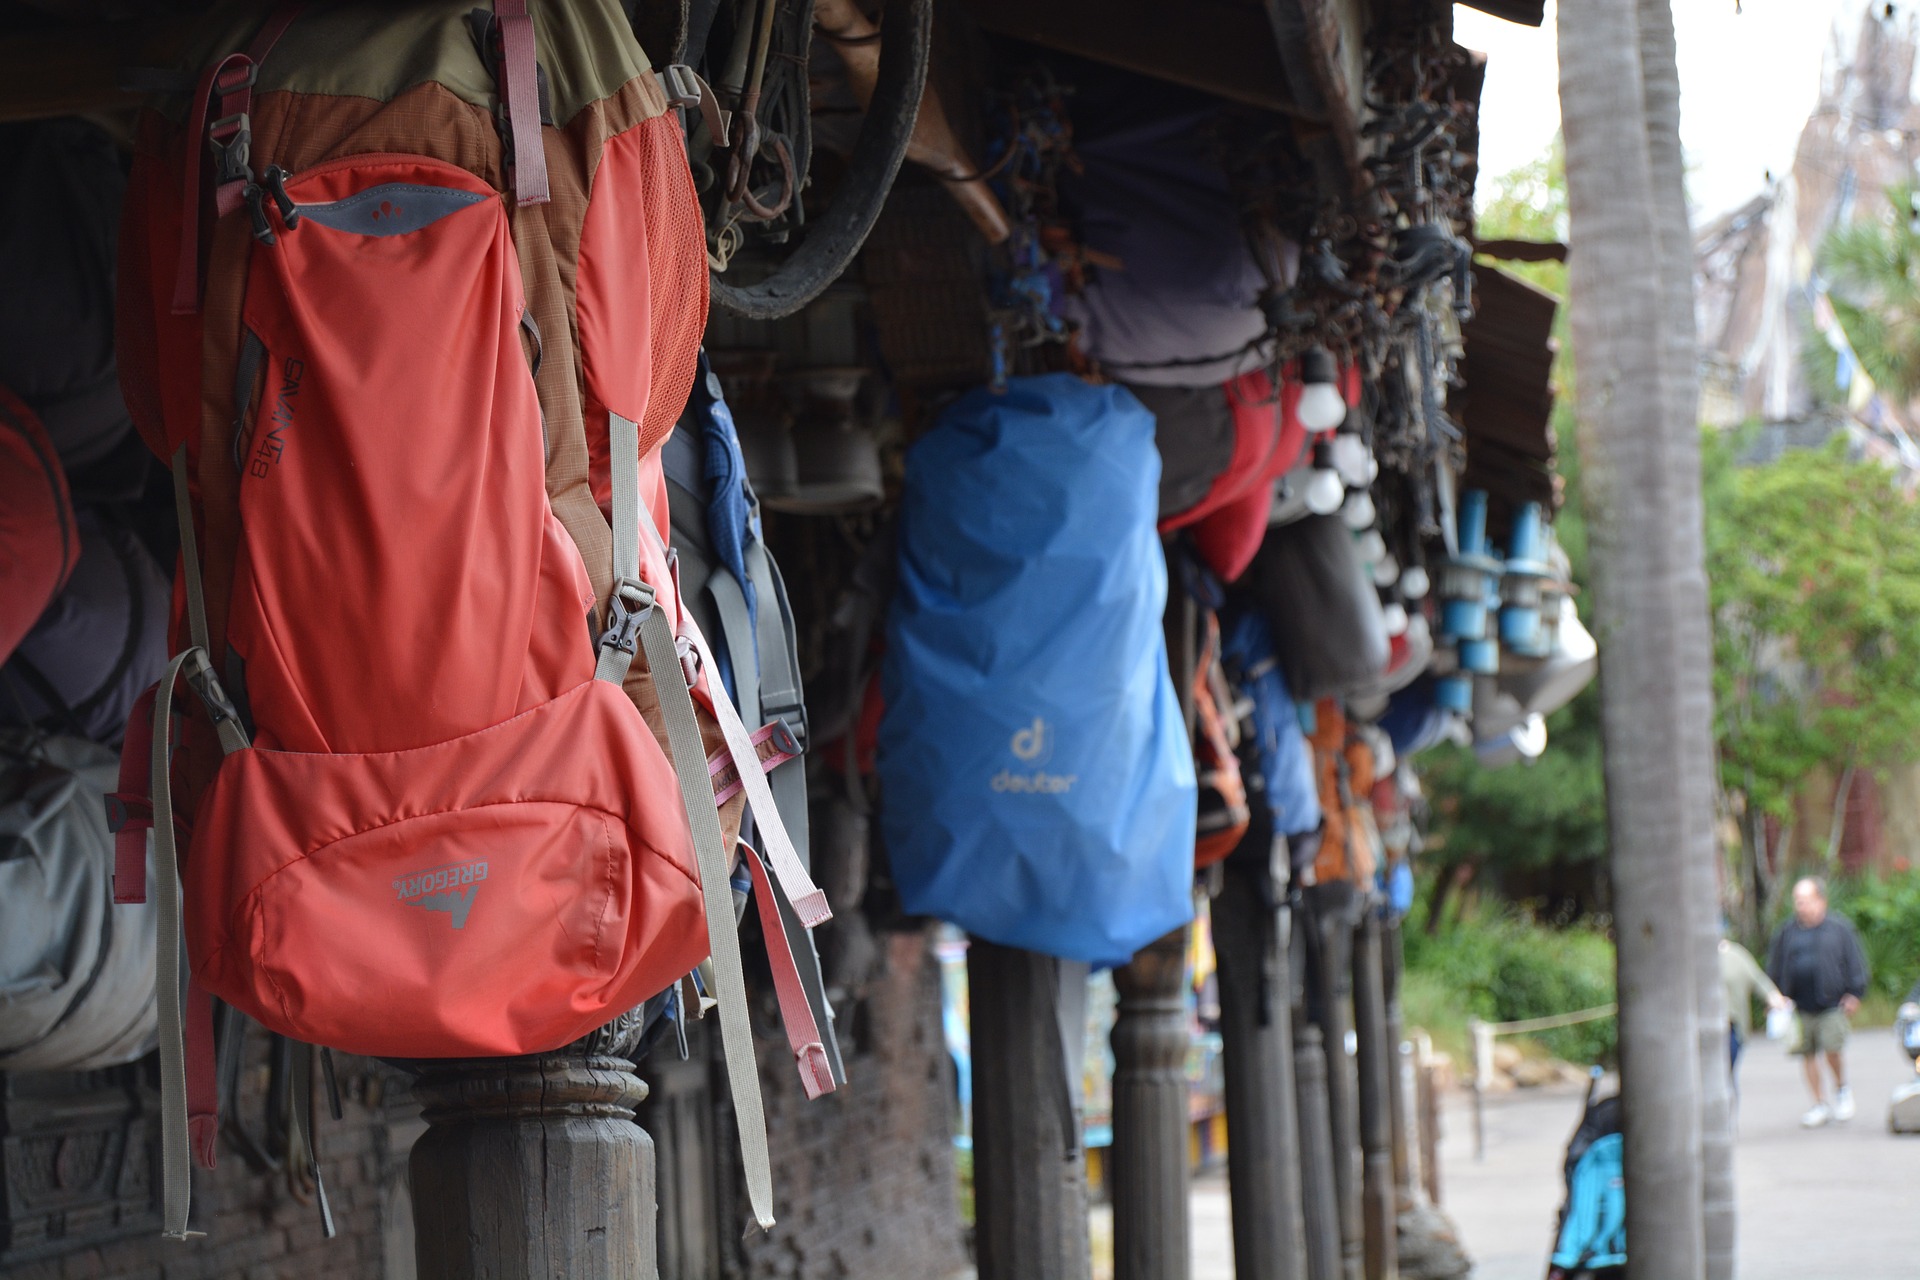 Backpacking gear for mountain climbers on Everest.